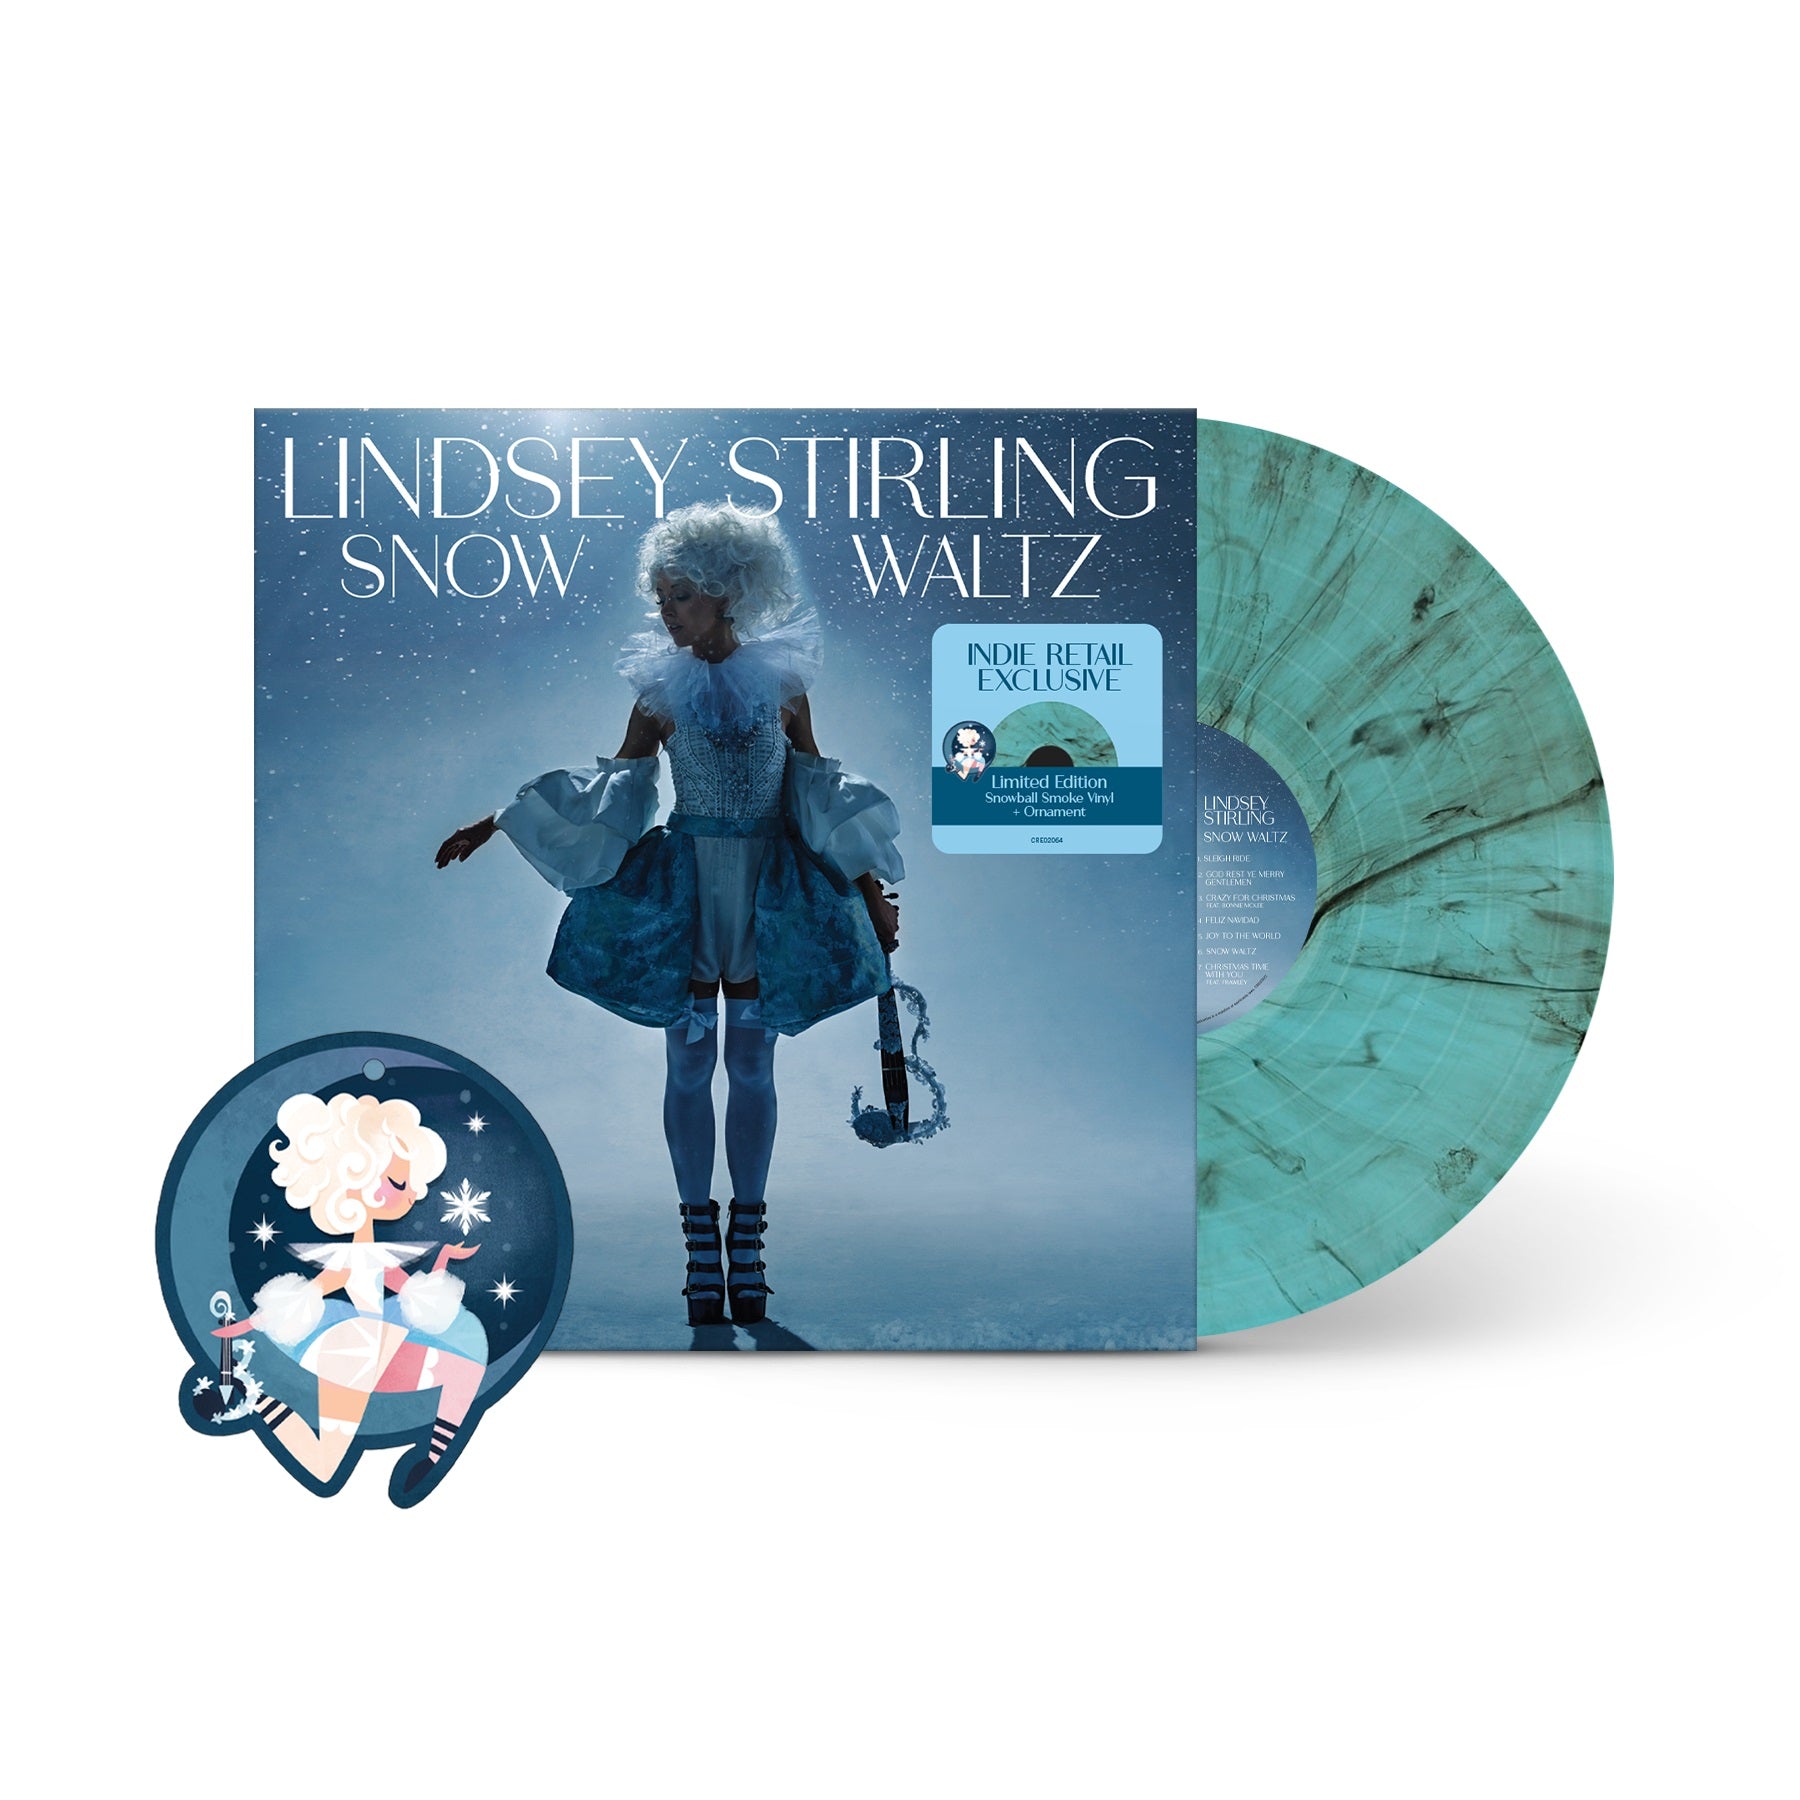 Buy Lindsey Stirling - Snow Waltz (Indie Exclusive, Limited Edition, Snowball Smoke Vinyl + Ornament)